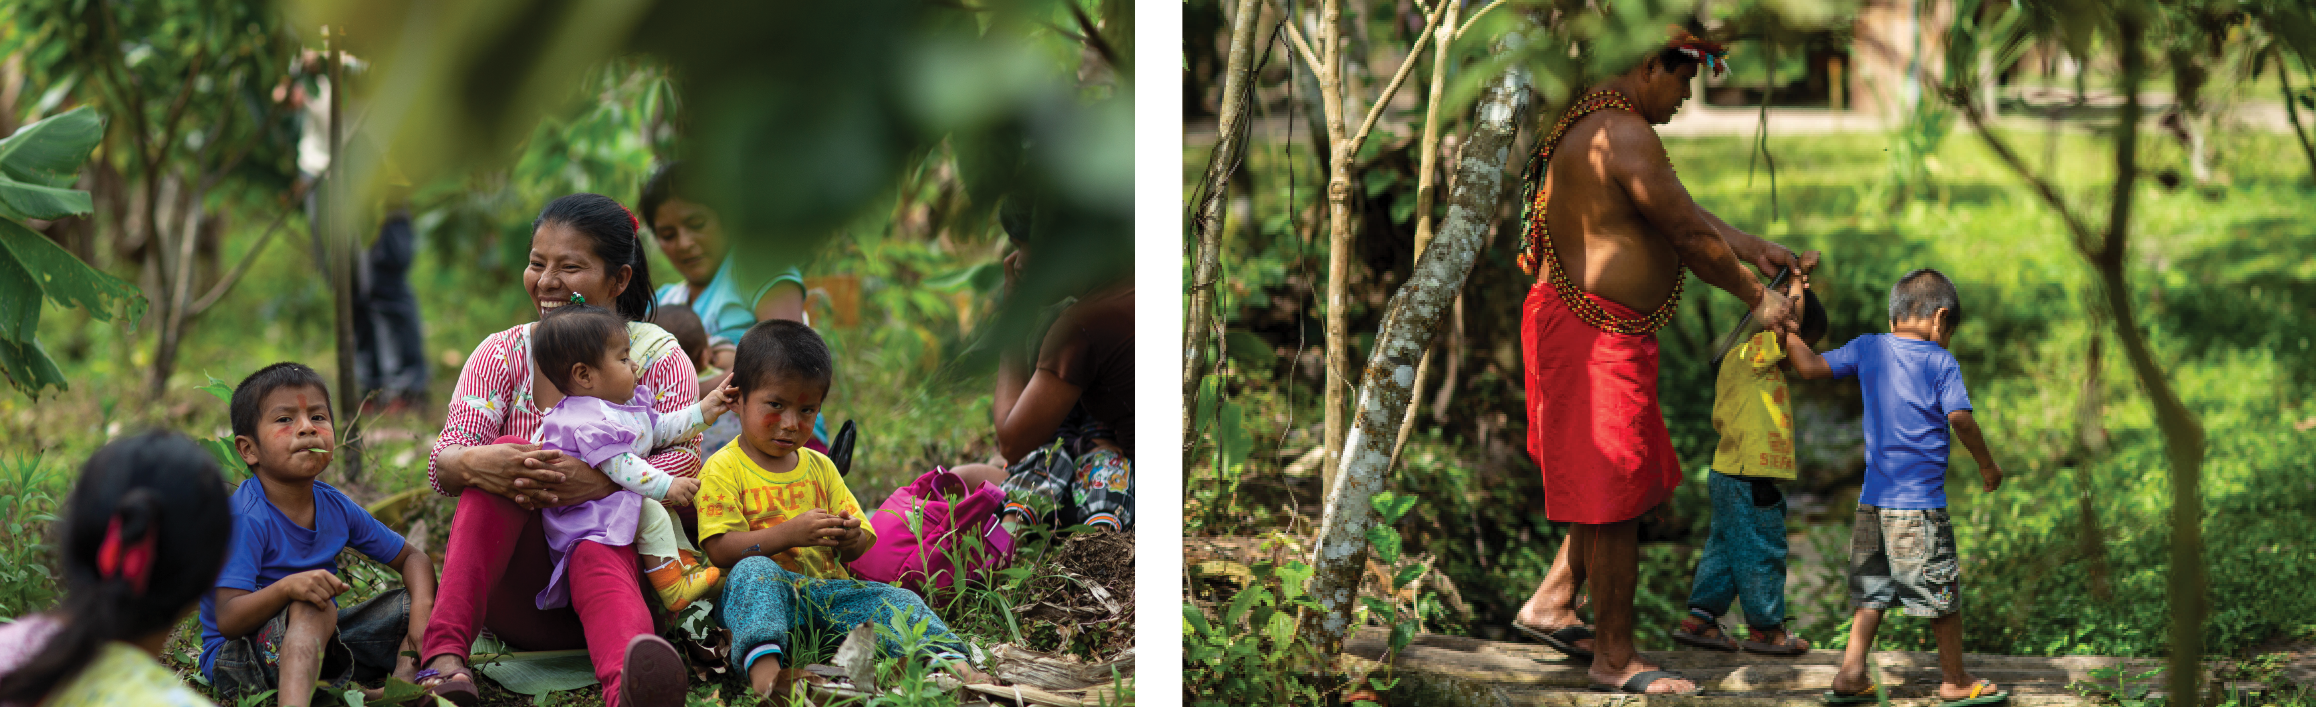 In the Peruvian Awajún indigenous community of Shampuyacu, Awajún women and men live in close relationship with forests.